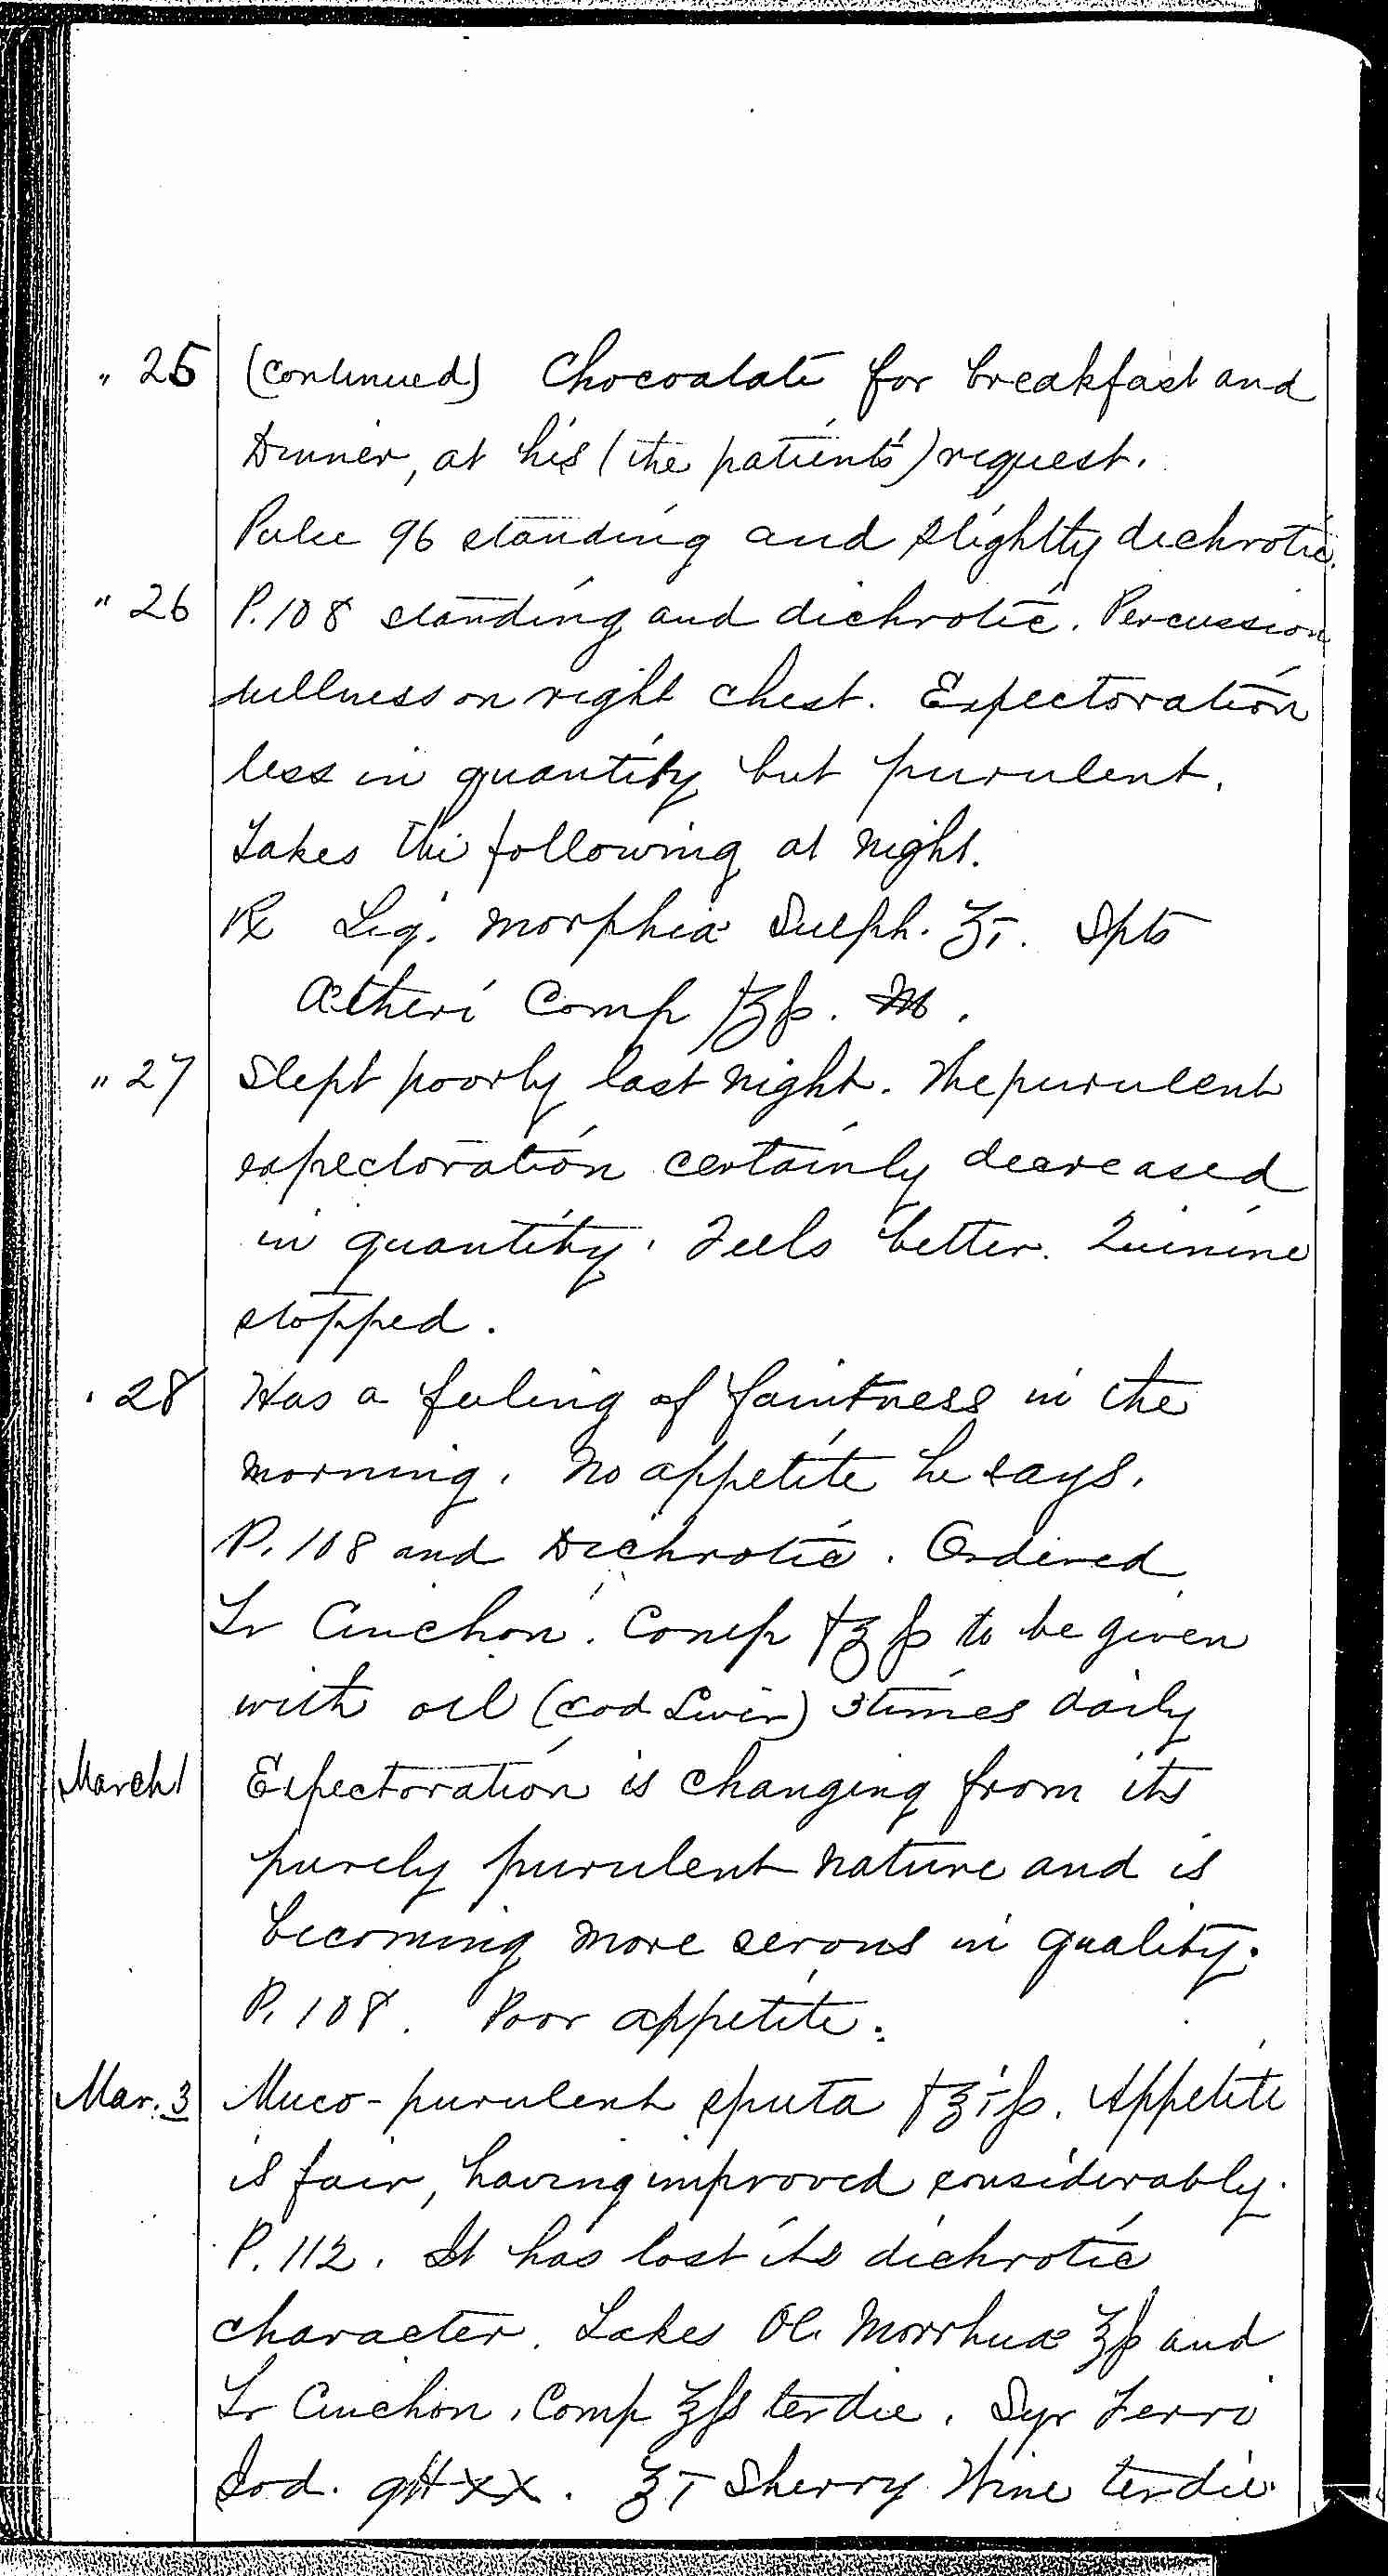 Entry for Peter C. Cheeks (page 8 of 16) in the log Hospital Tickets and Case Papers - Naval Hospital - Washington, D.C. - 1868-69